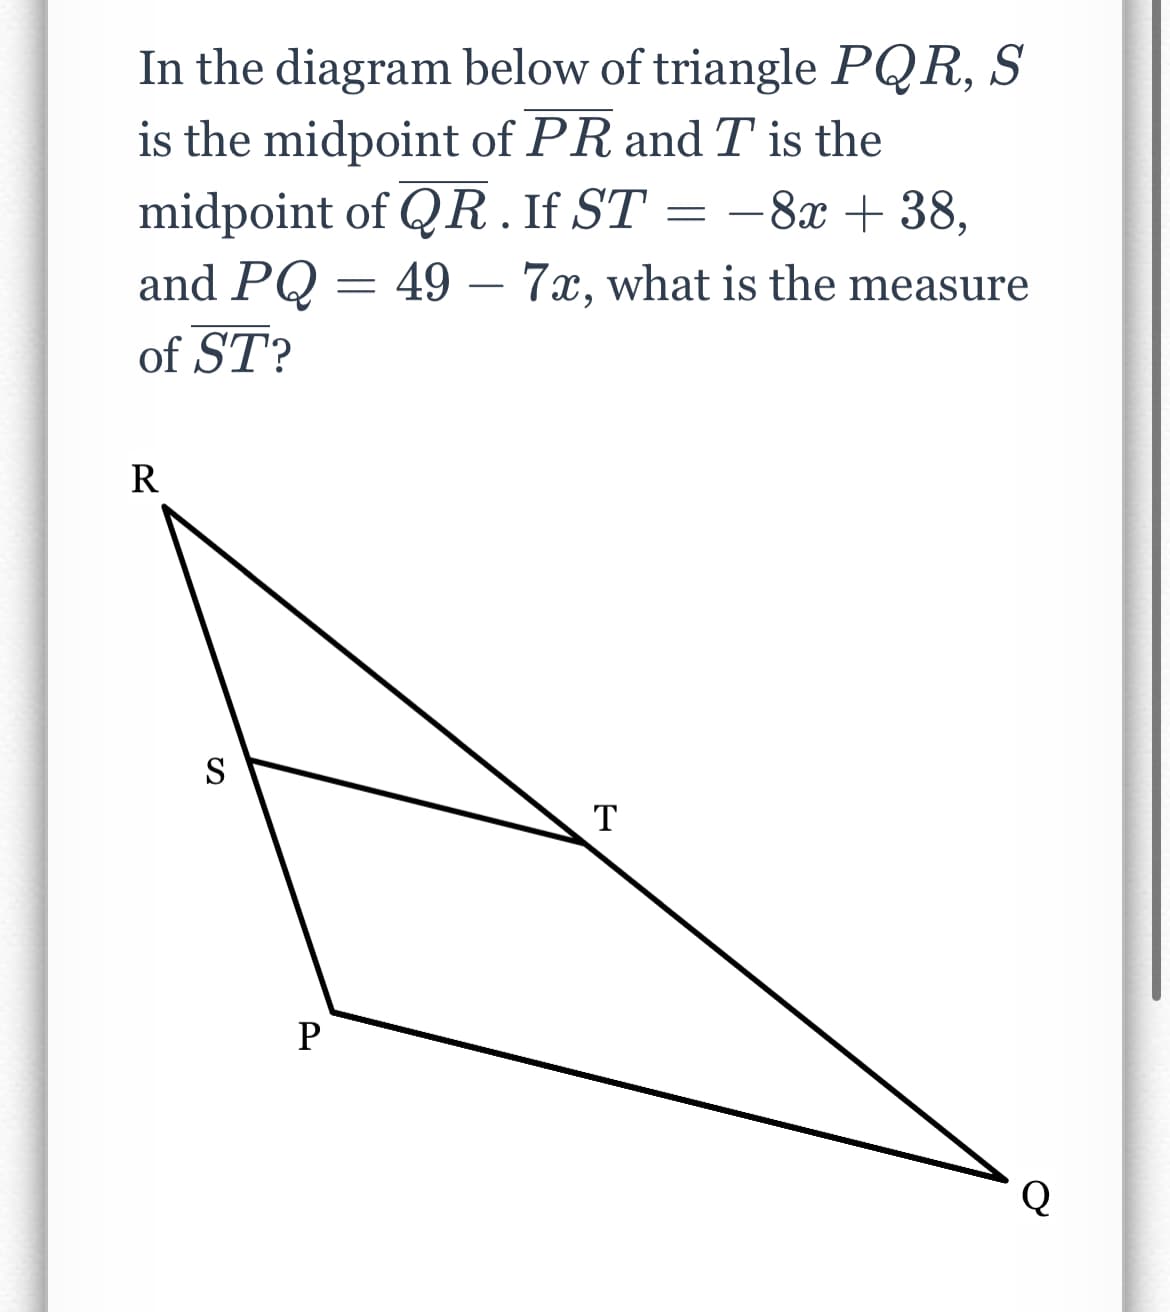 In the diagram below of triangle PQR, S
is the midpoint of PR and T is the
midpoint of QR. If ST = -8x + 38,
and PQ = 49 - 7x, what is the measure
of ST?
R
S
P
T